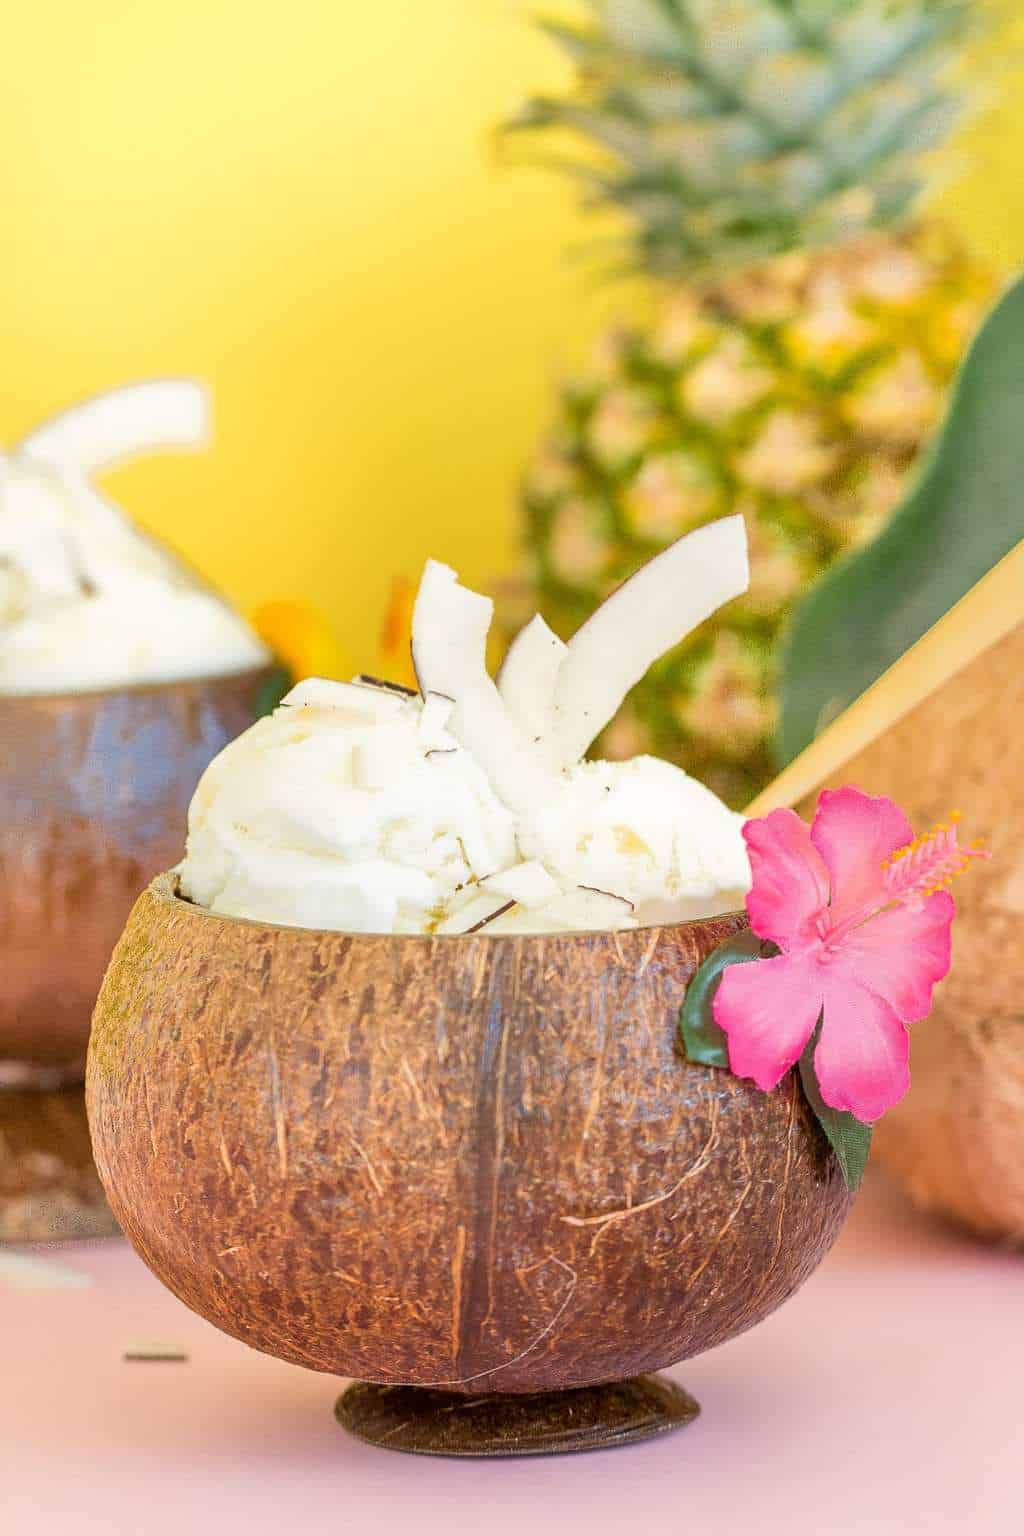 An easy No-Churn Creamy Pineapple Coconut Ice Cream recipe to make for a sunny or rainy Summer day! - sugar and cloth